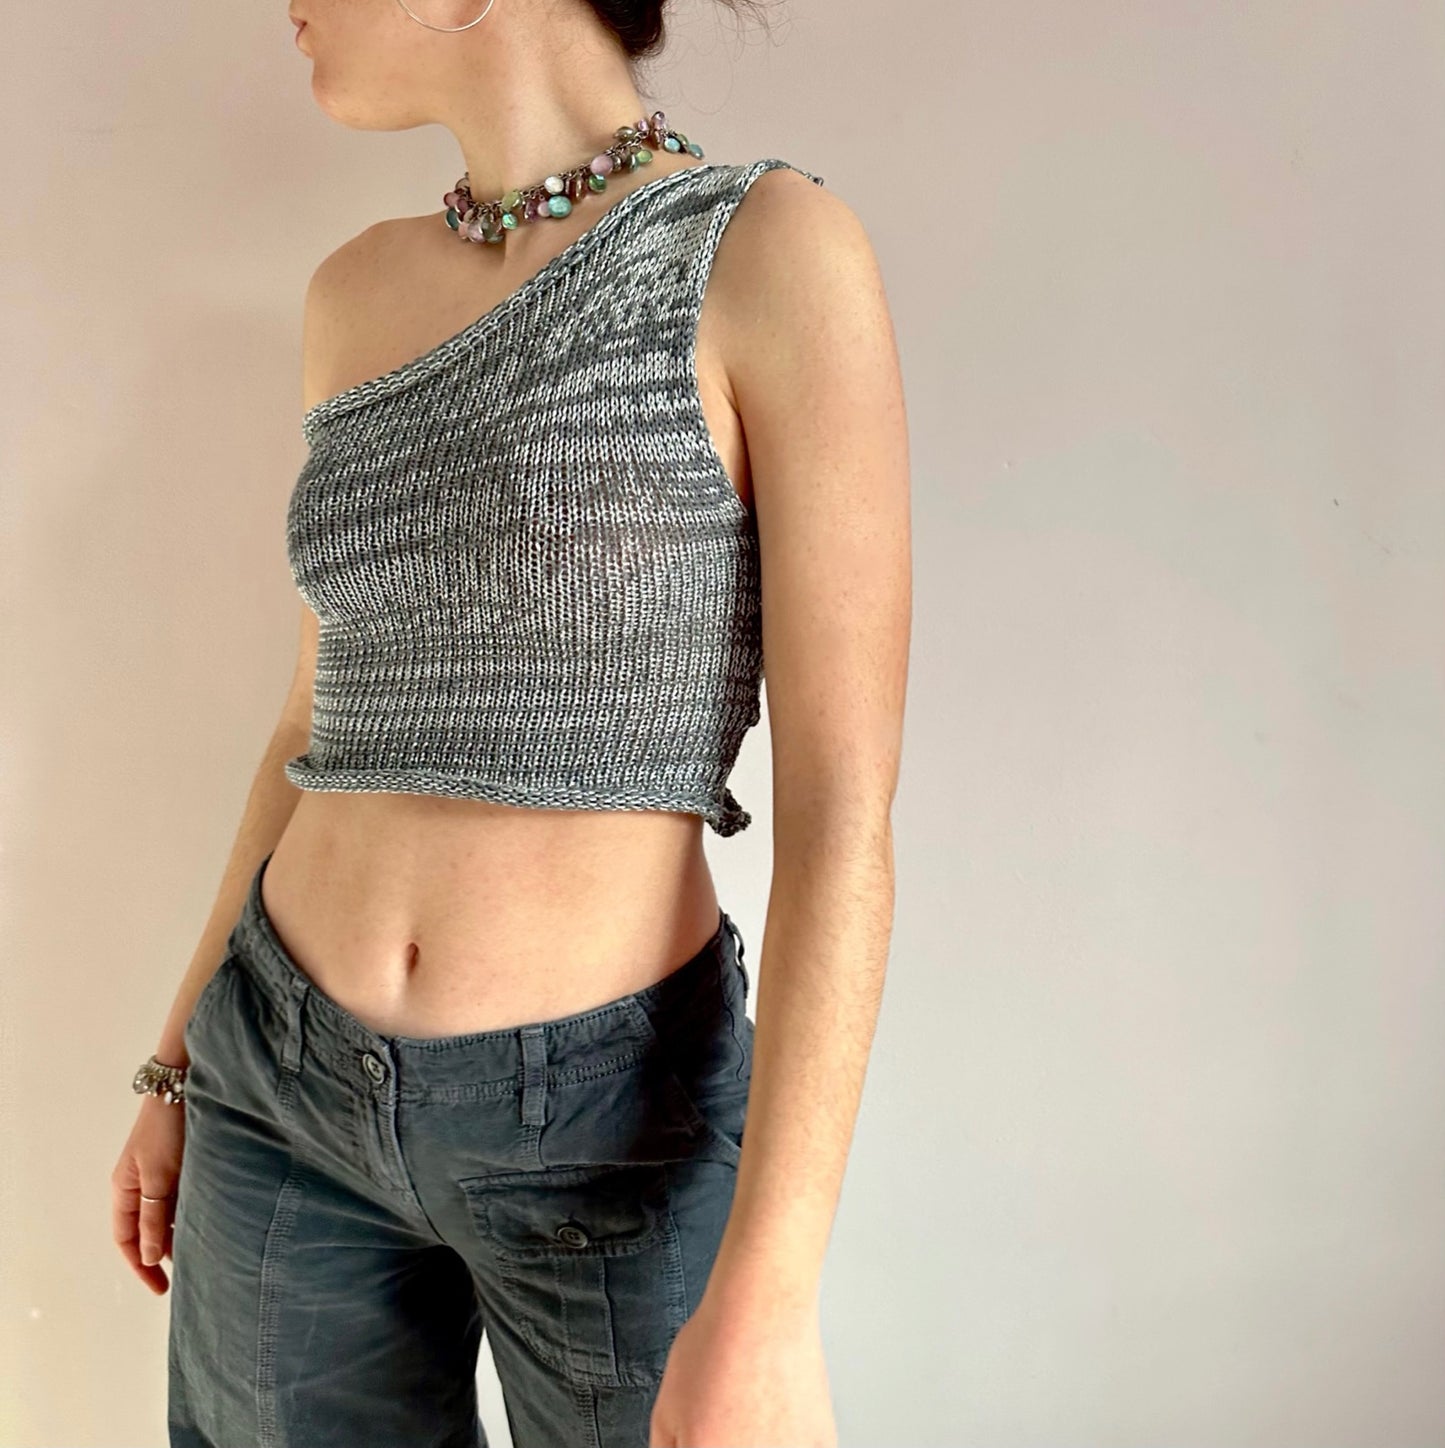 Handmade knitted metallic asymmetrical one shoulder top in silver and grey